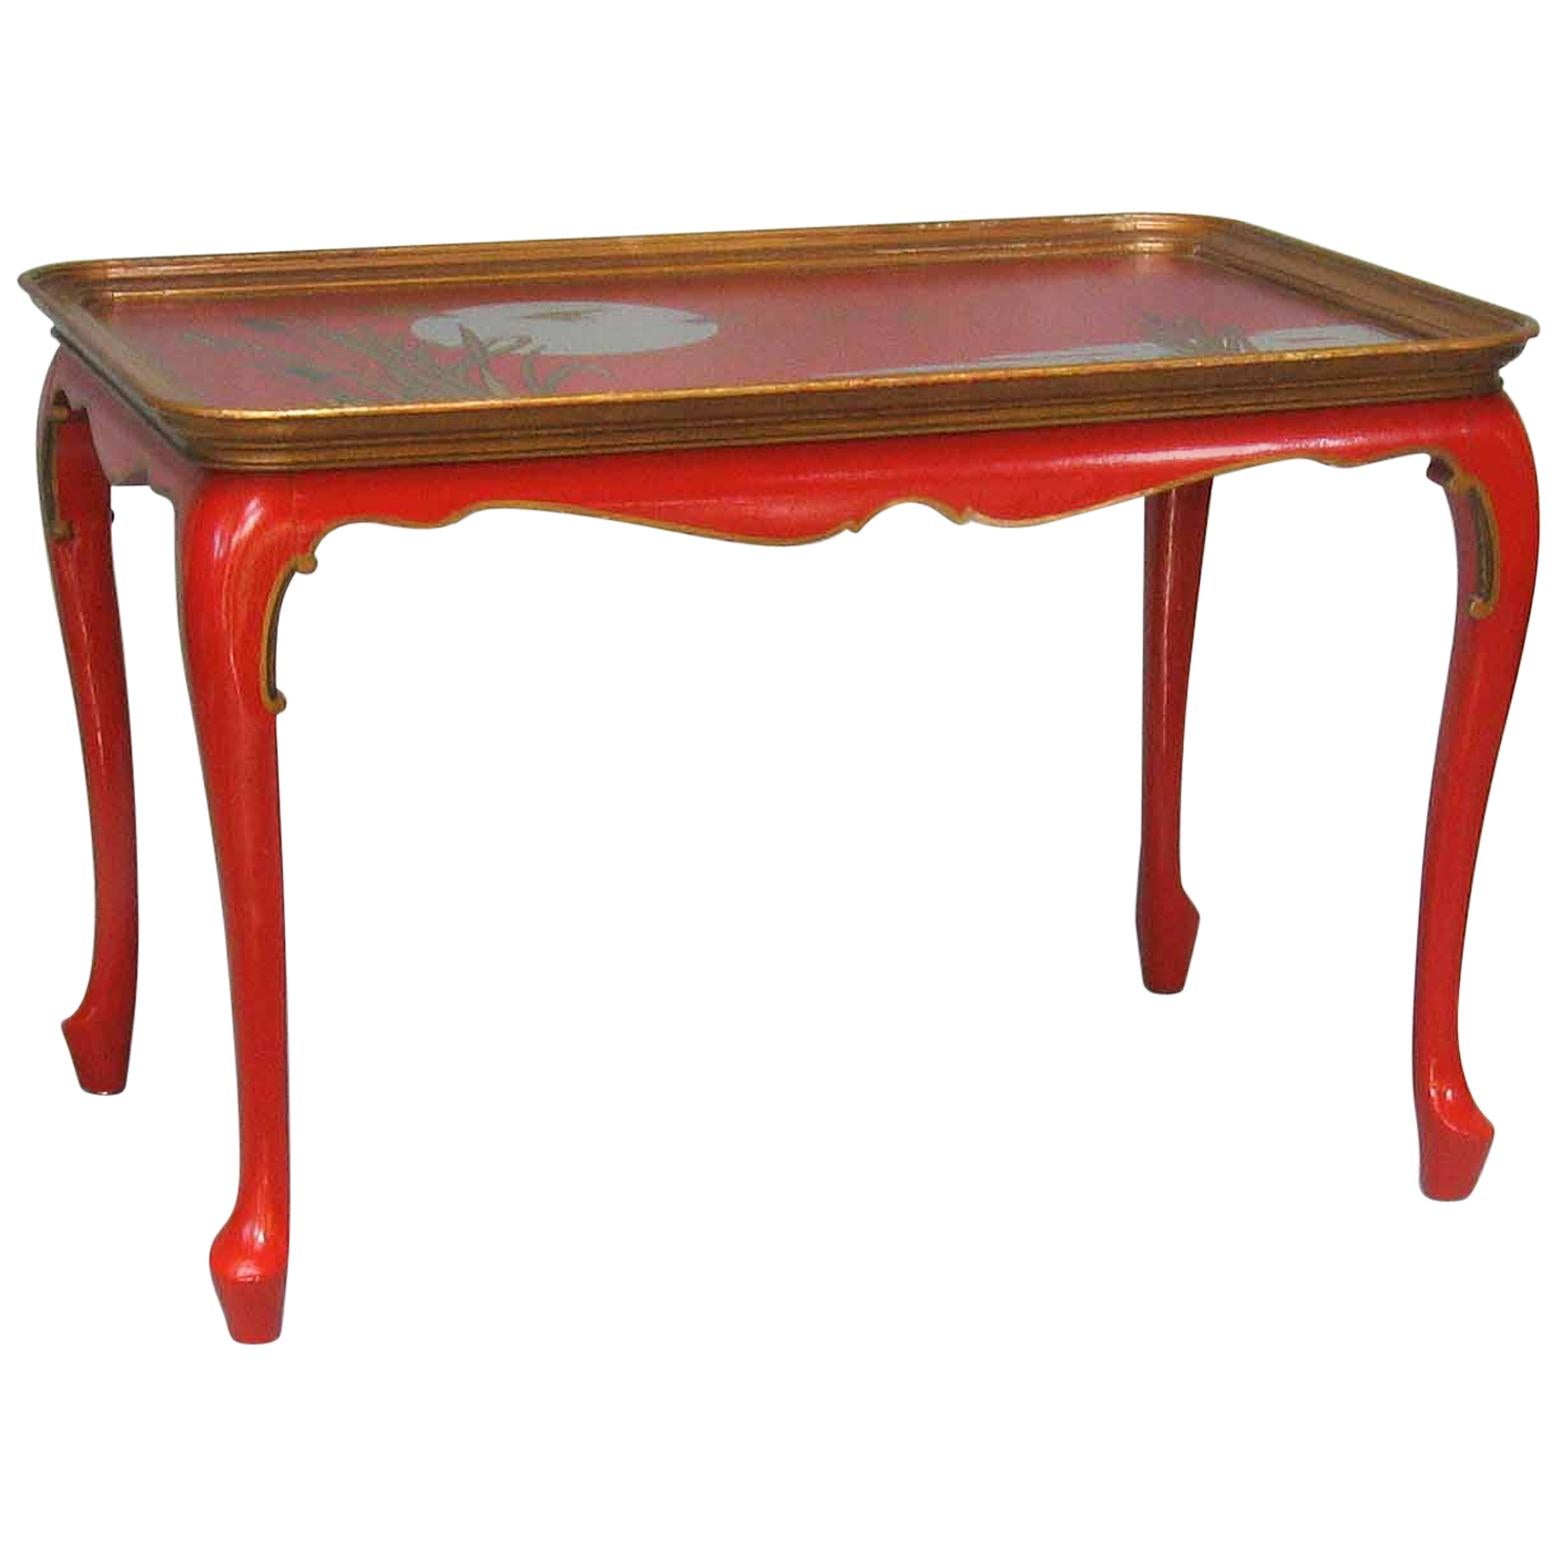 Elegant and Striking Japanned Tray or Cocktail Table French, Mid-20th Century